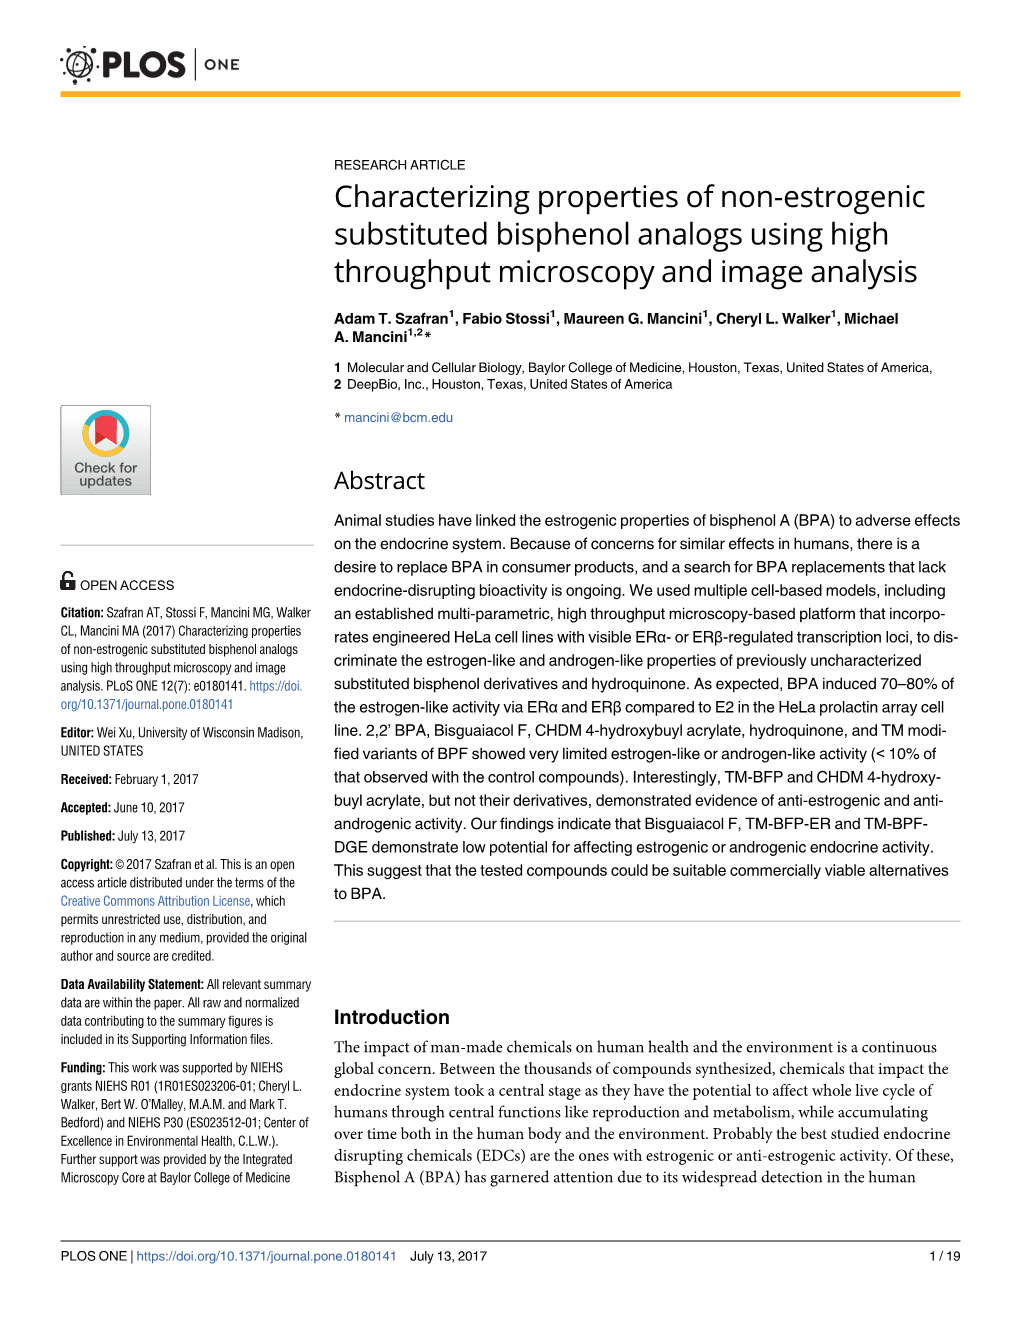 Characterizing Properties of Non-Estrogenic Substituted Bisphenol Analogs Using High Throughput Microscopy and Image Analysis